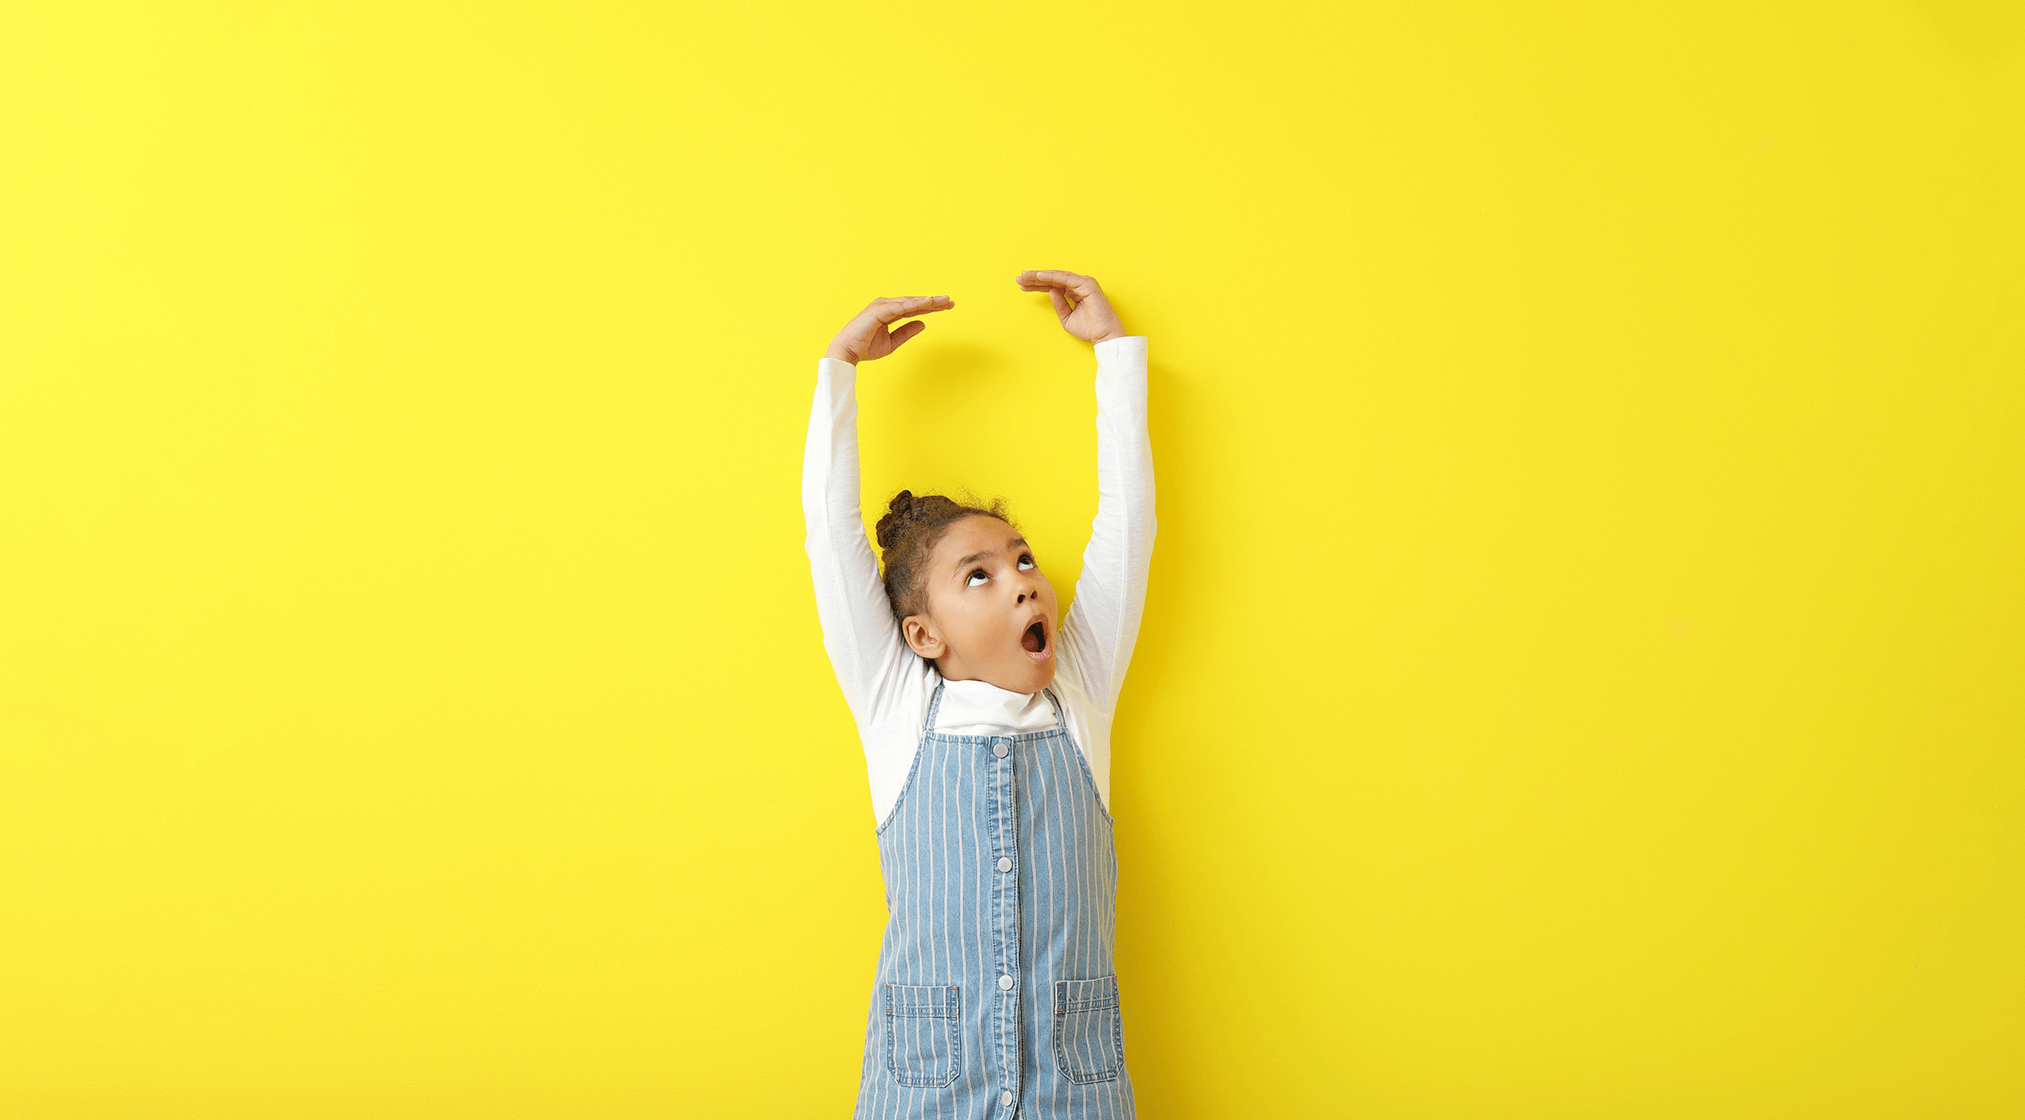 Little girl in front of a yellow background, showing how tall she will become one day